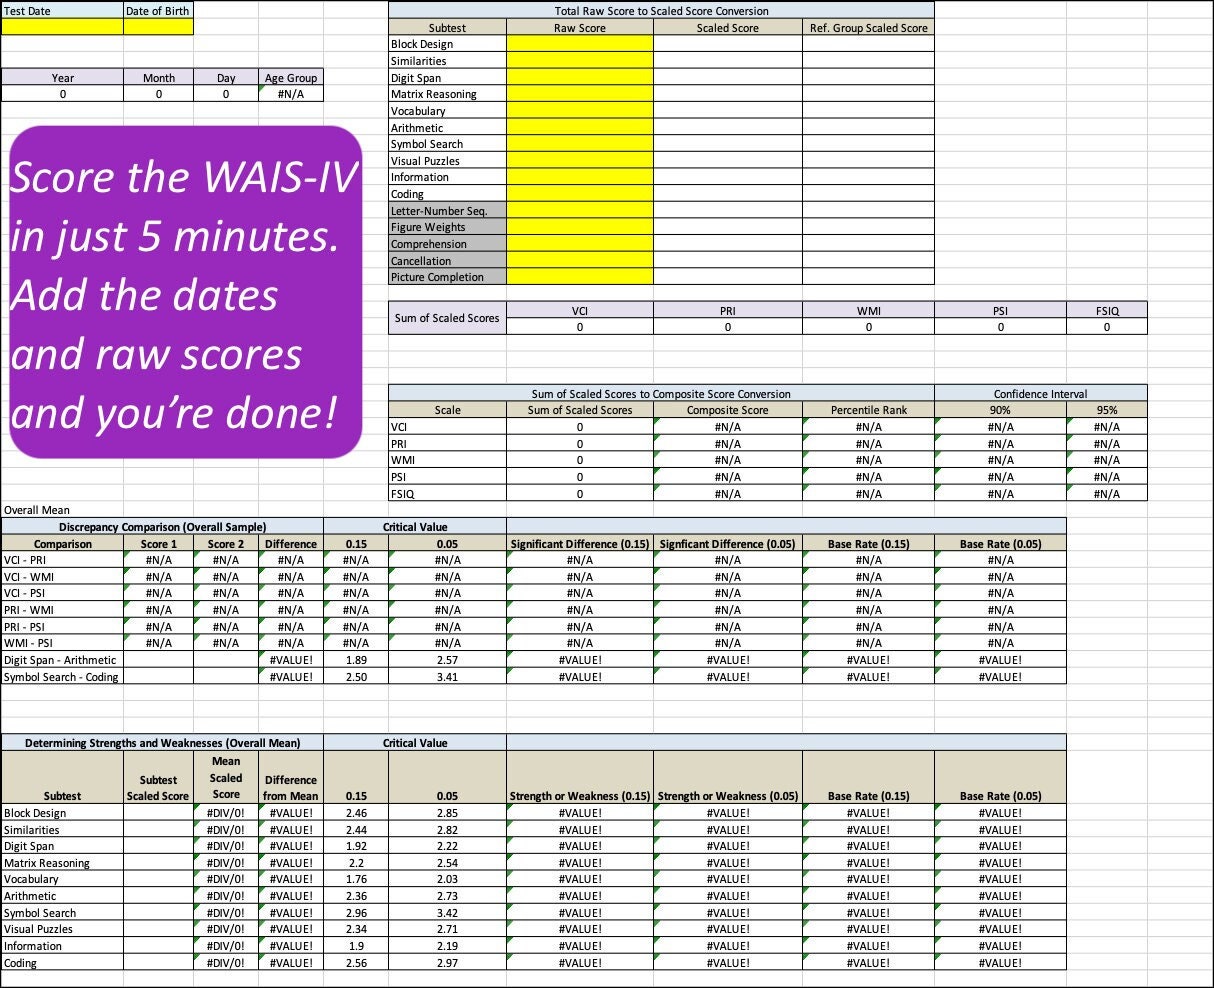 Results for the Wechsler Adult Intelligence Scale-Revised short forms